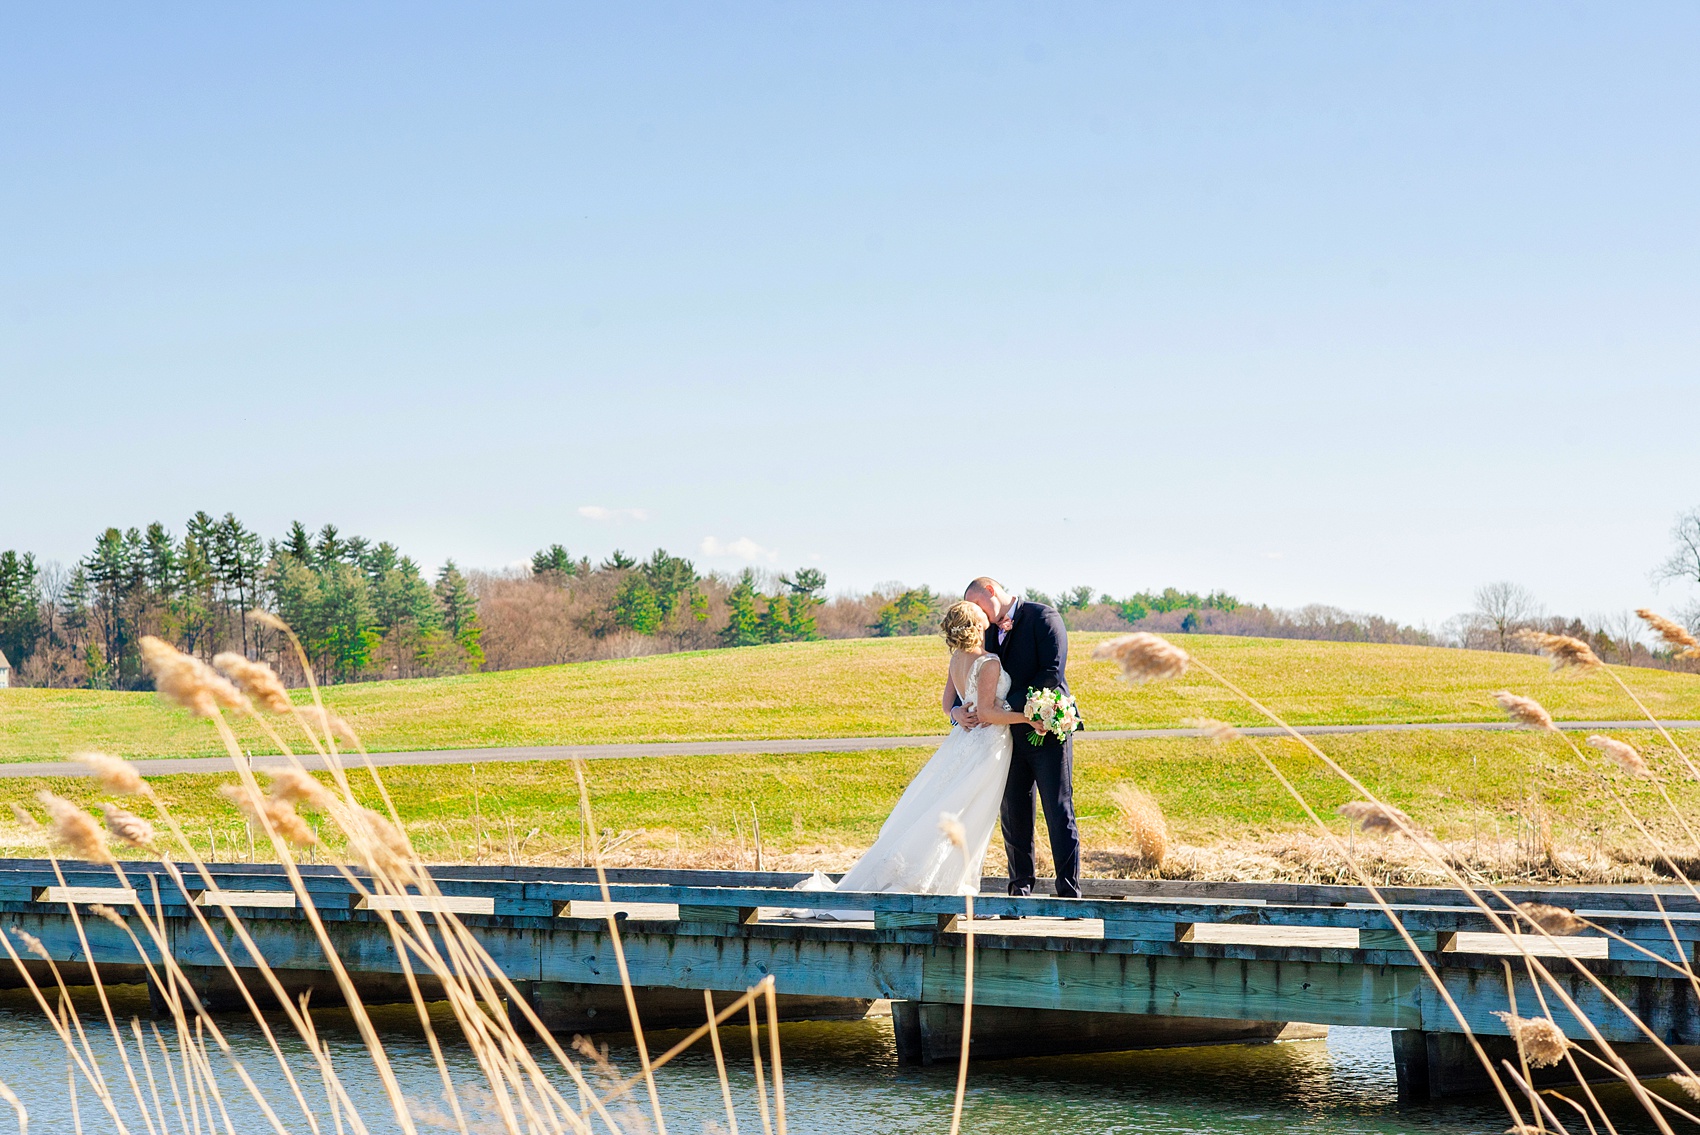 Saratoga Springs destination wedding photos by Mikkel Paige Photography. The bride and groom shared a kiss on the bridge surrounded by spring greenery for their reception held at Saratoga National Golf Club venue. #SaratogaSpringsNY #SaratogaSprings #mikkelpaige #NYwedding #destinationwedding 